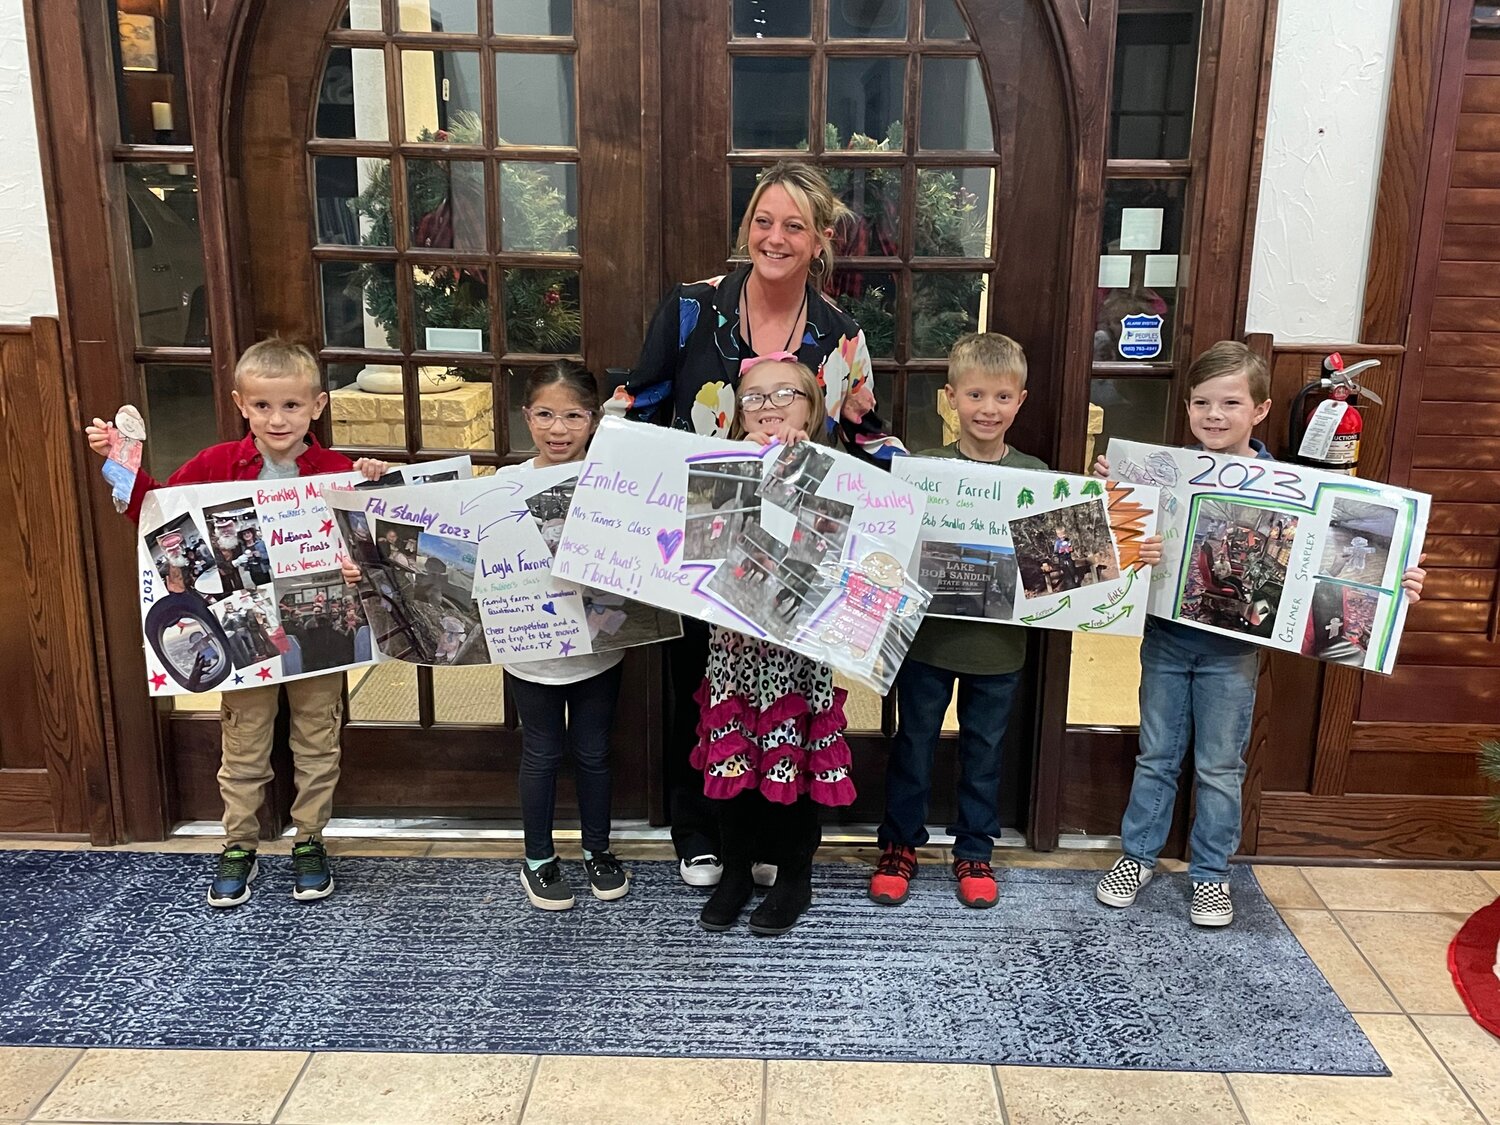 Connie Russell, Quitman ISD librarian, with first-graders who presented to the school board last week about their Flat Stanley poster projects.